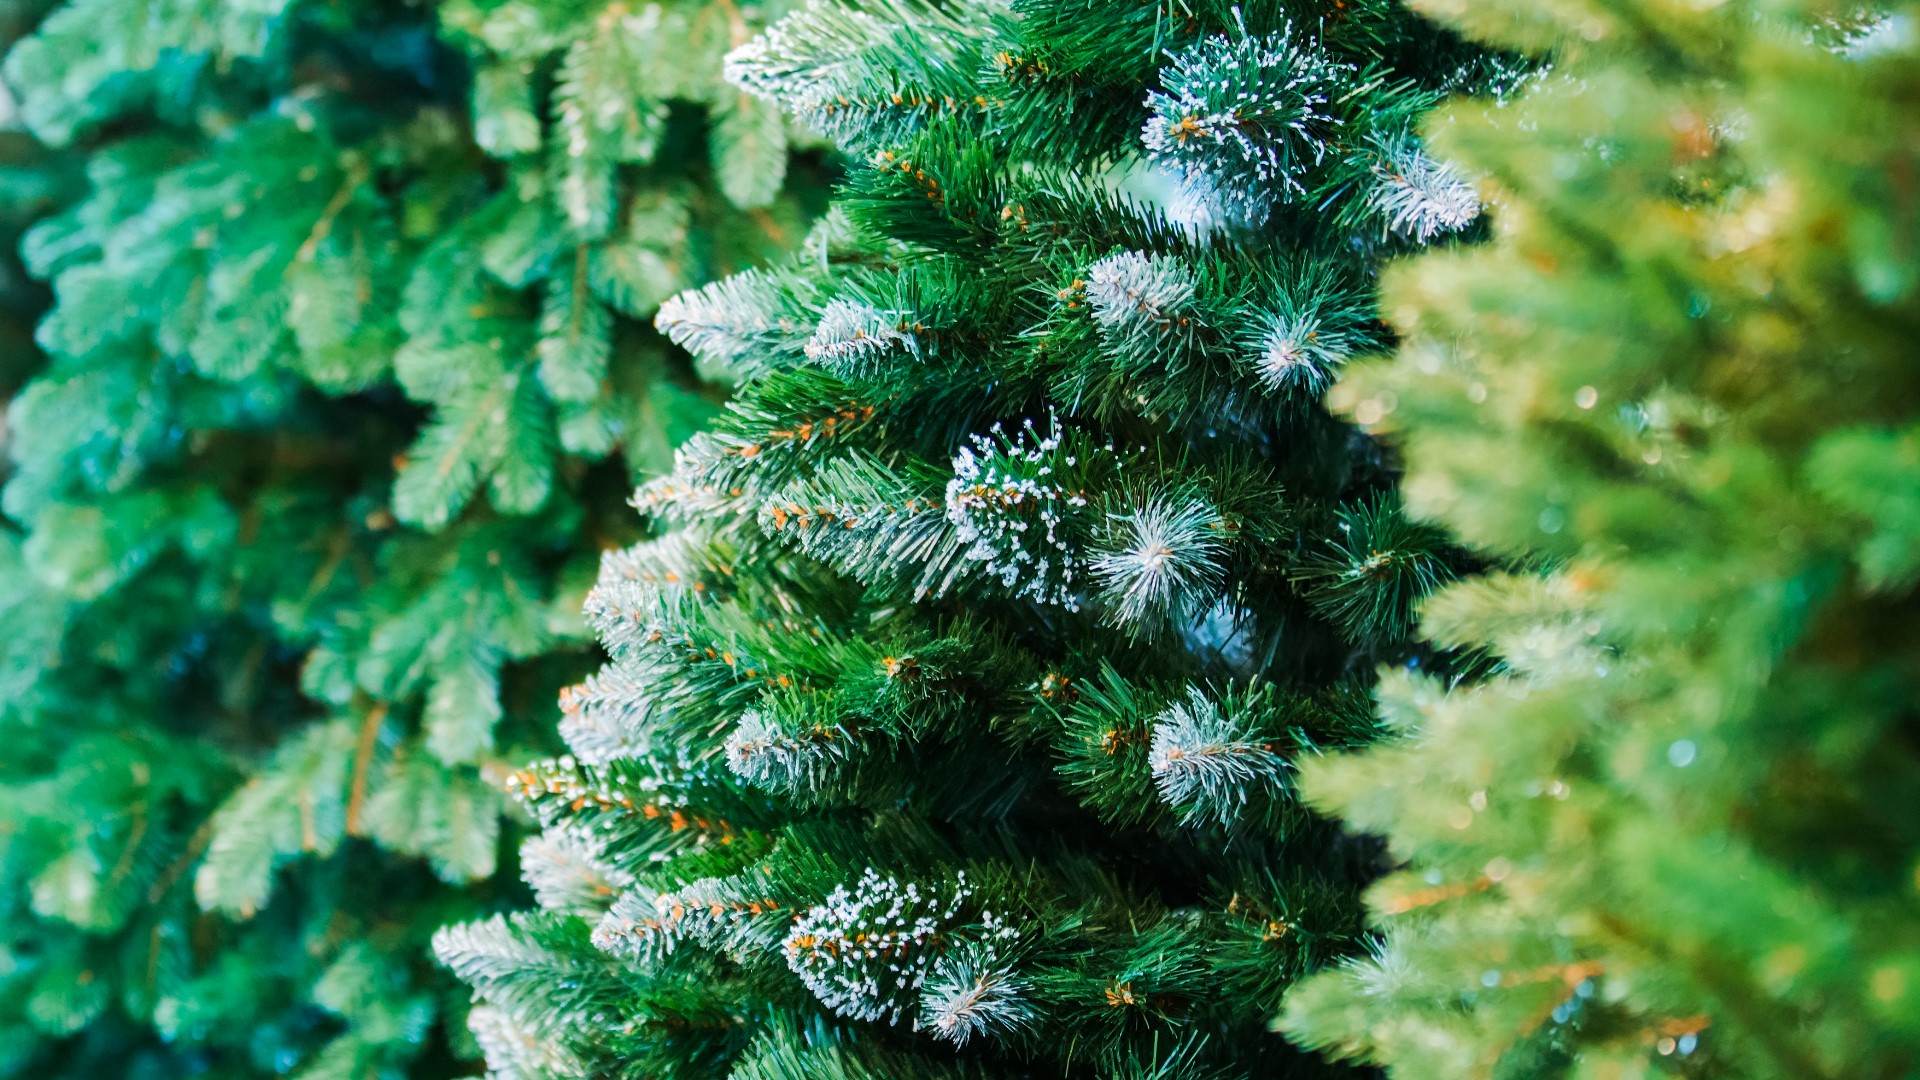 Artificial trees can gather dust, mold spores and other allergens. This can trigger an allergic reaction that’s sometimes called “Christmas tree syndrome."